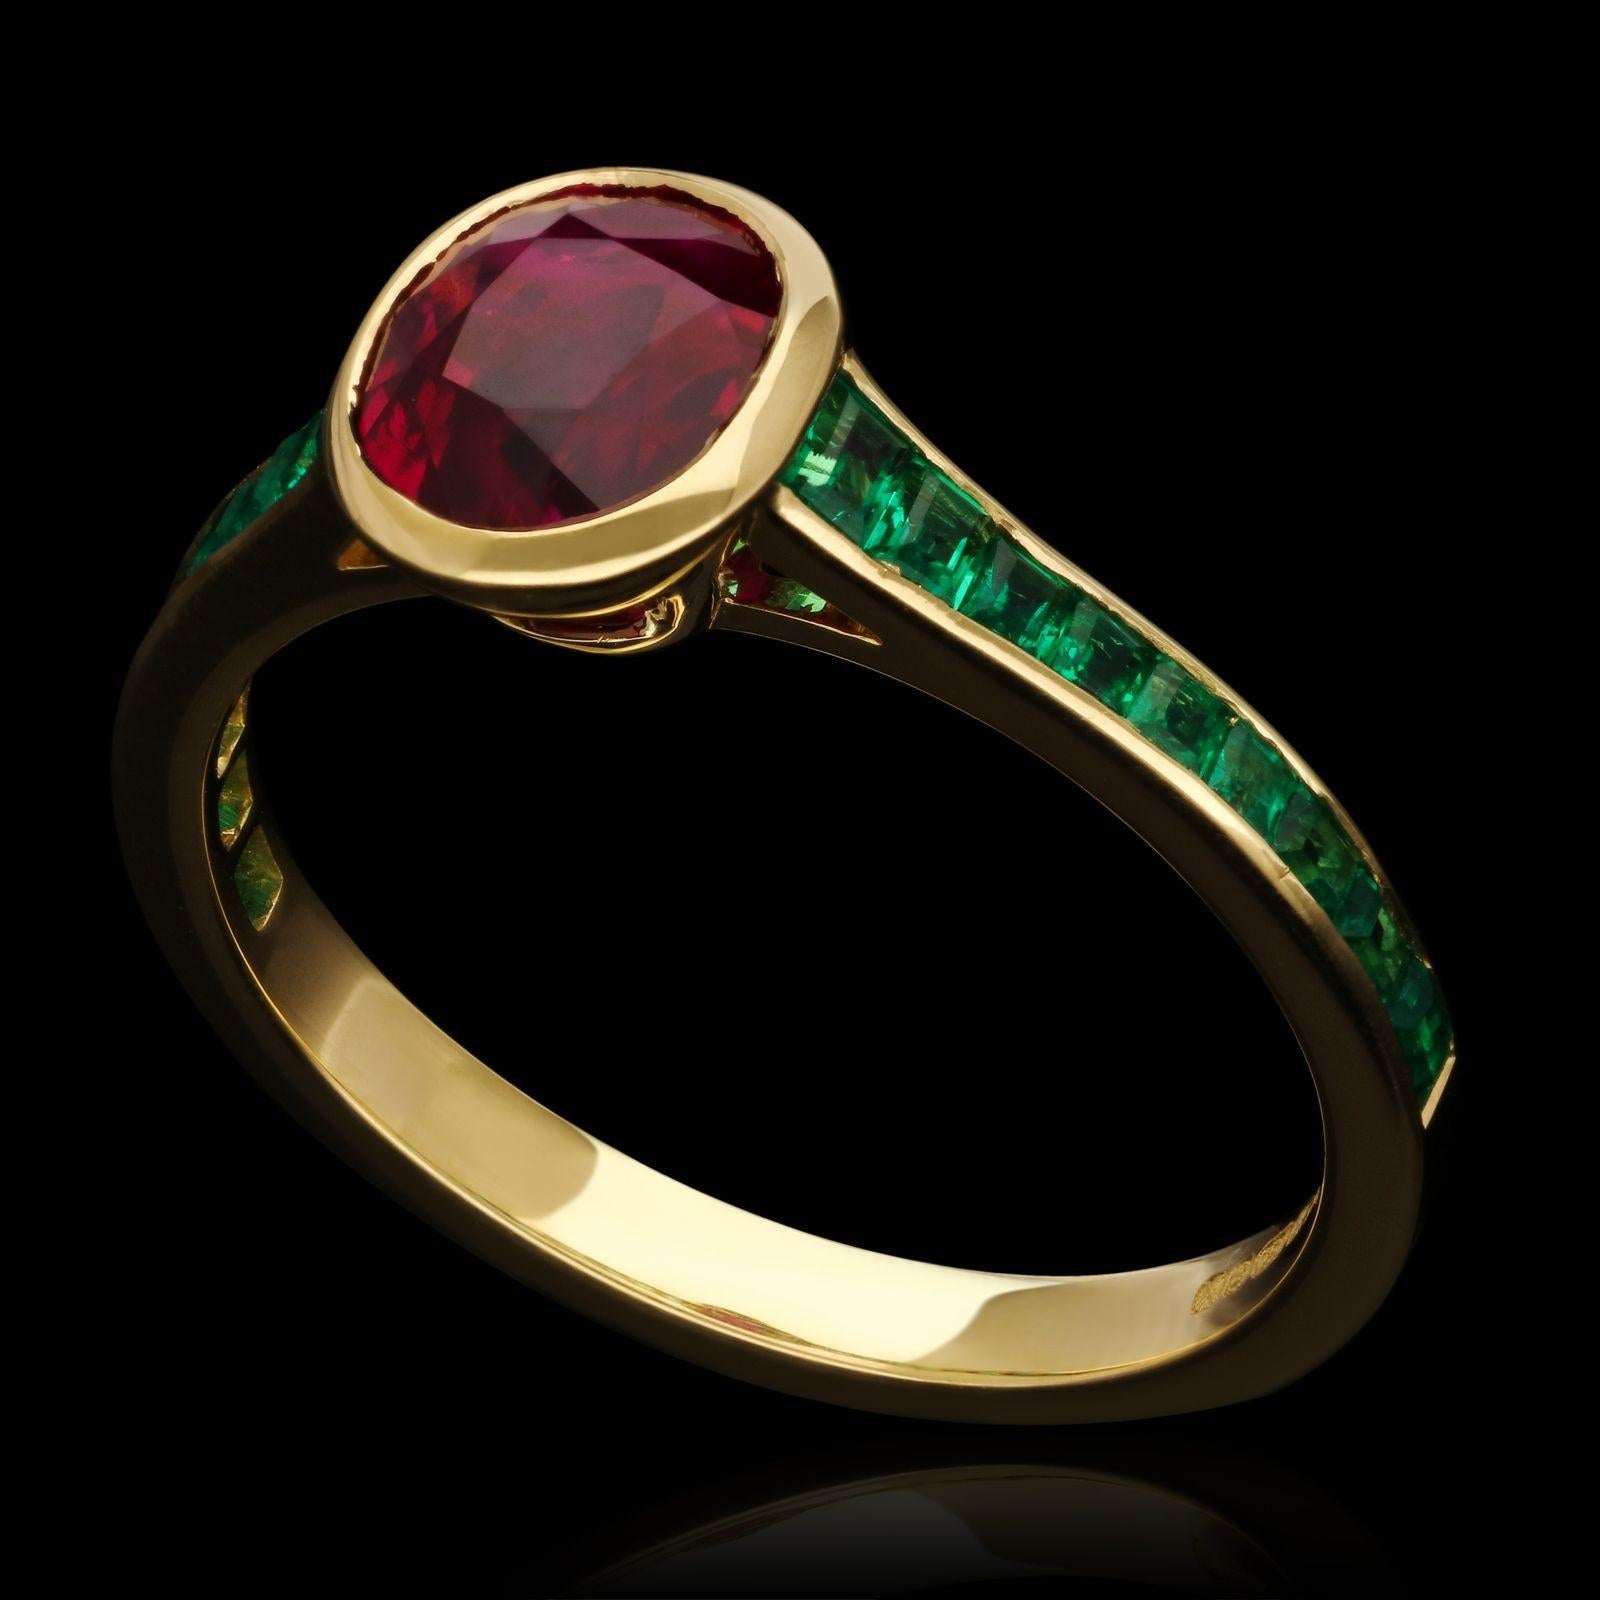 A beautiful ruby and emerald ring by Hancocks, centred with a vibrant cushion cut unheated Burmese ruby weighing 1.58cts in a rub over setting between elegantly tapering shoulders channel set with calibre cut emeralds, all in a finely hand crafted